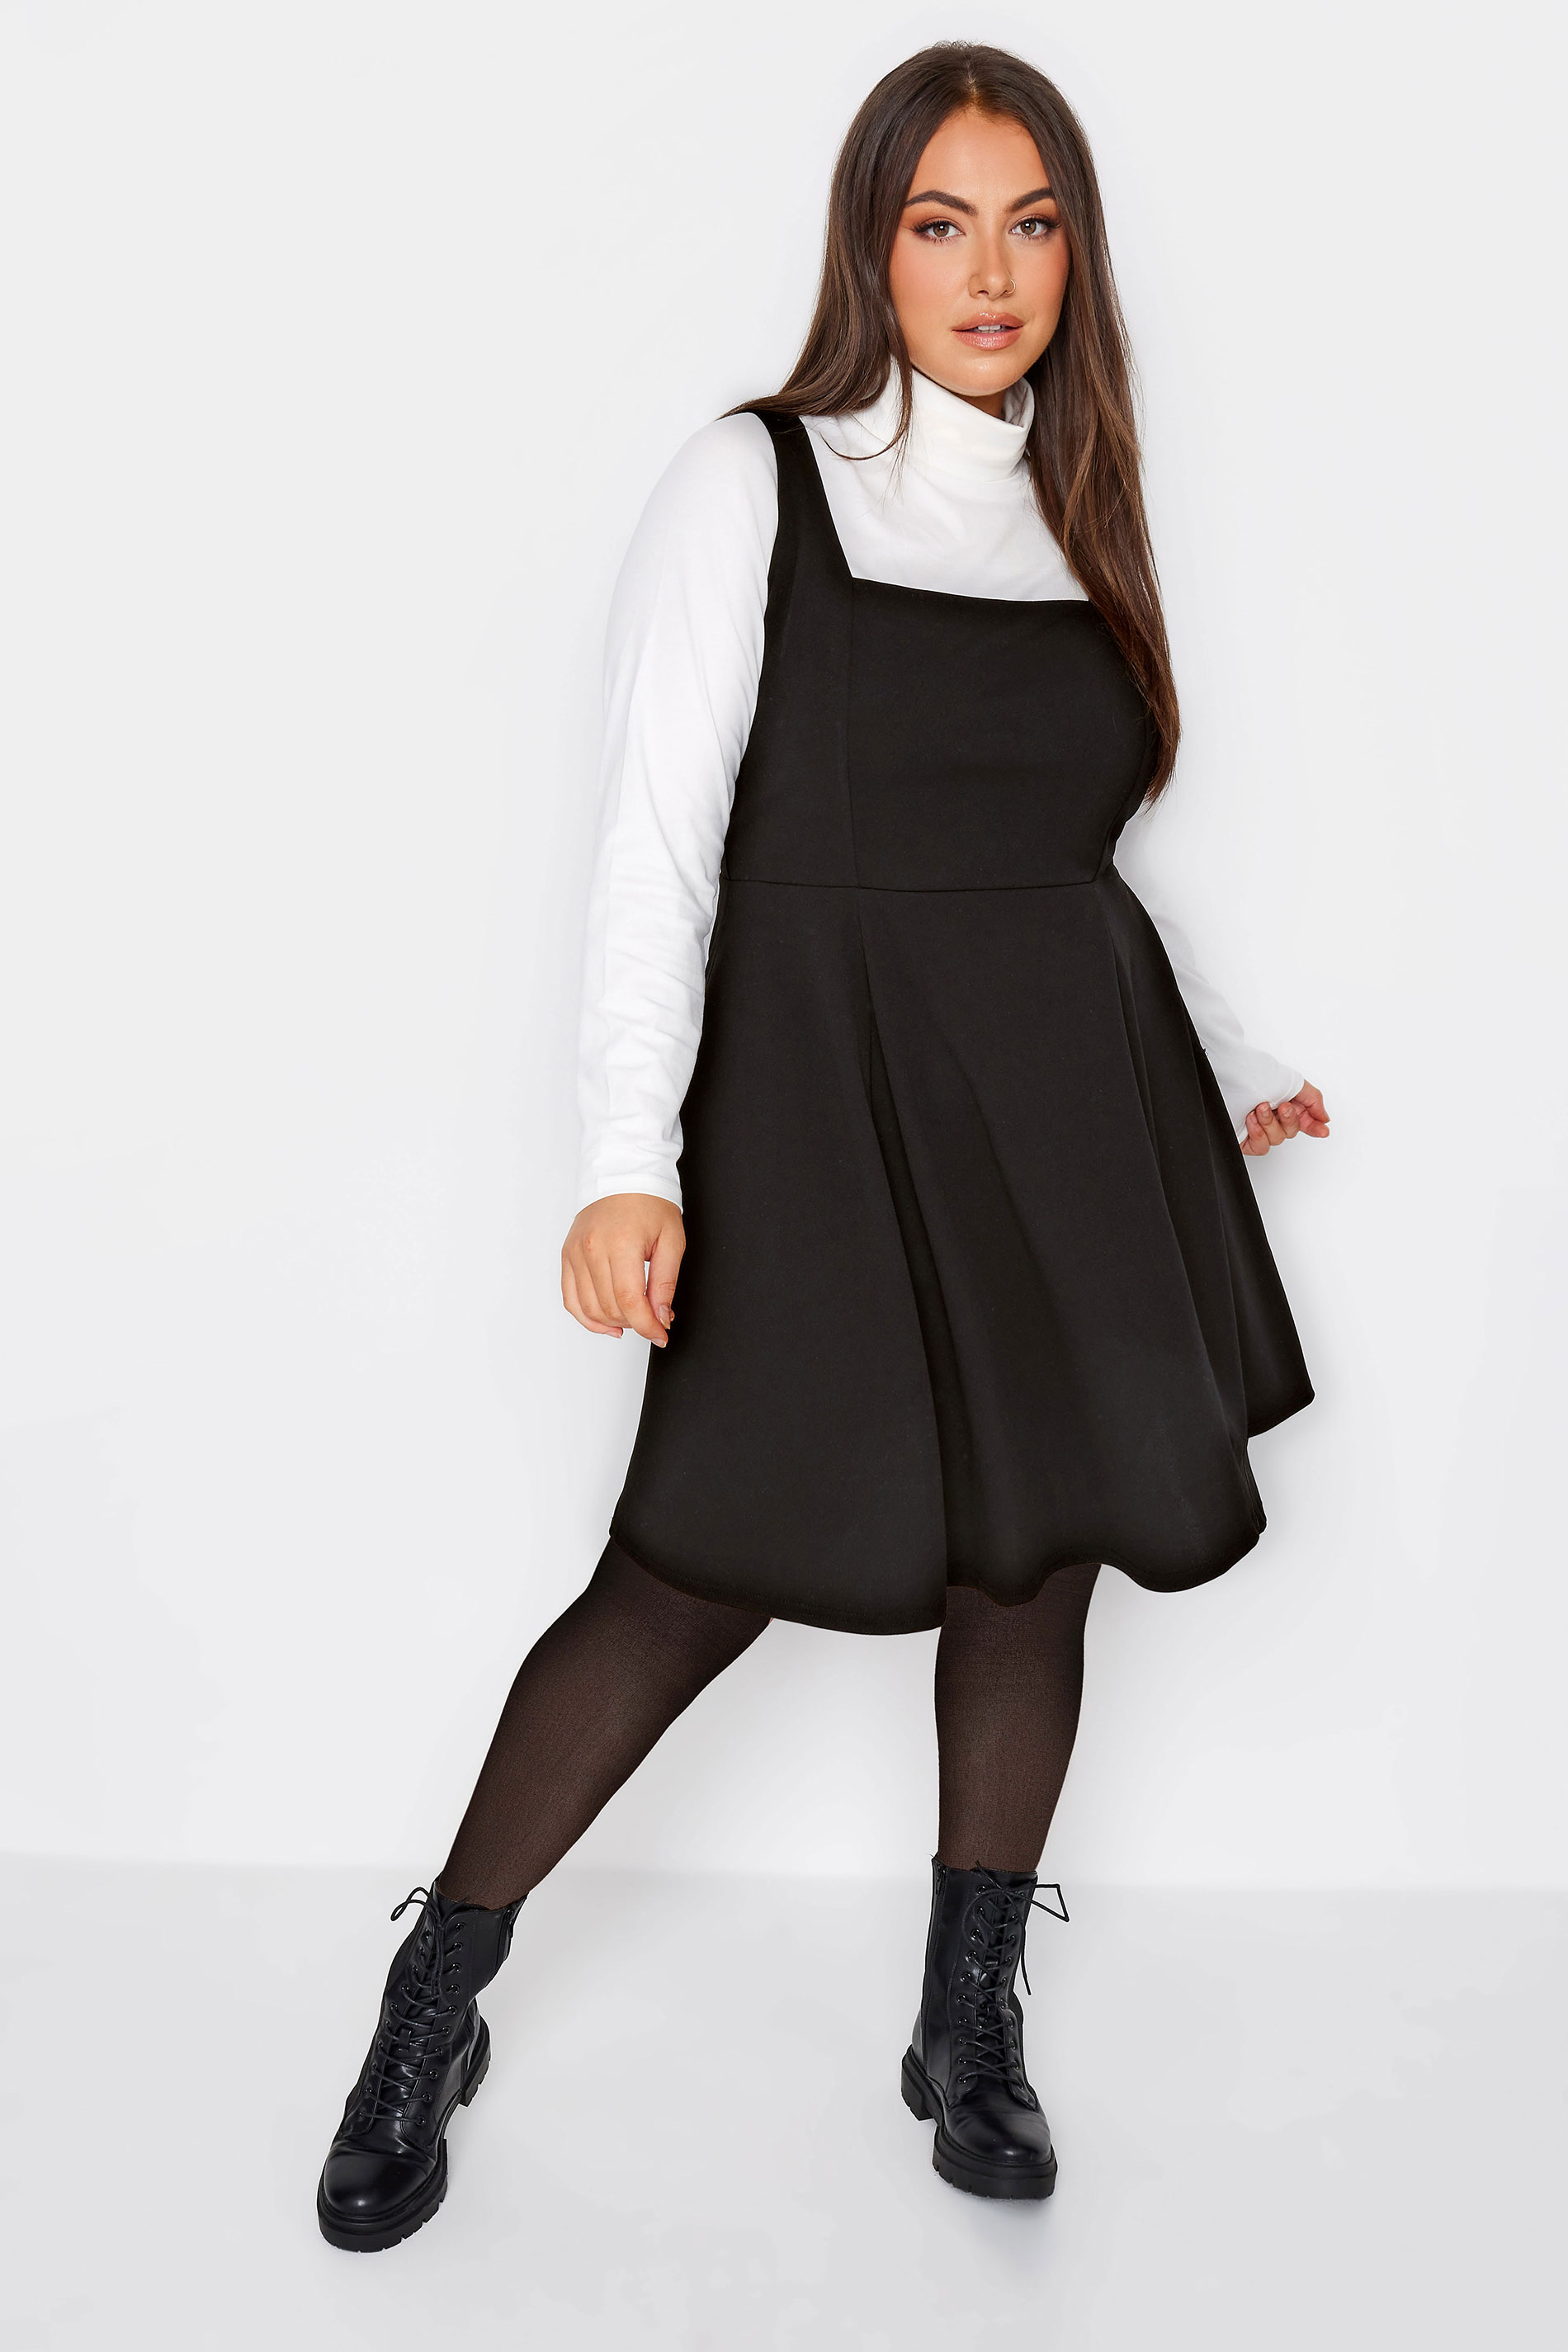 LIMITED COLLECTION Plus Size Black Square Neck Pinafore Dress | Yours Clothing 2